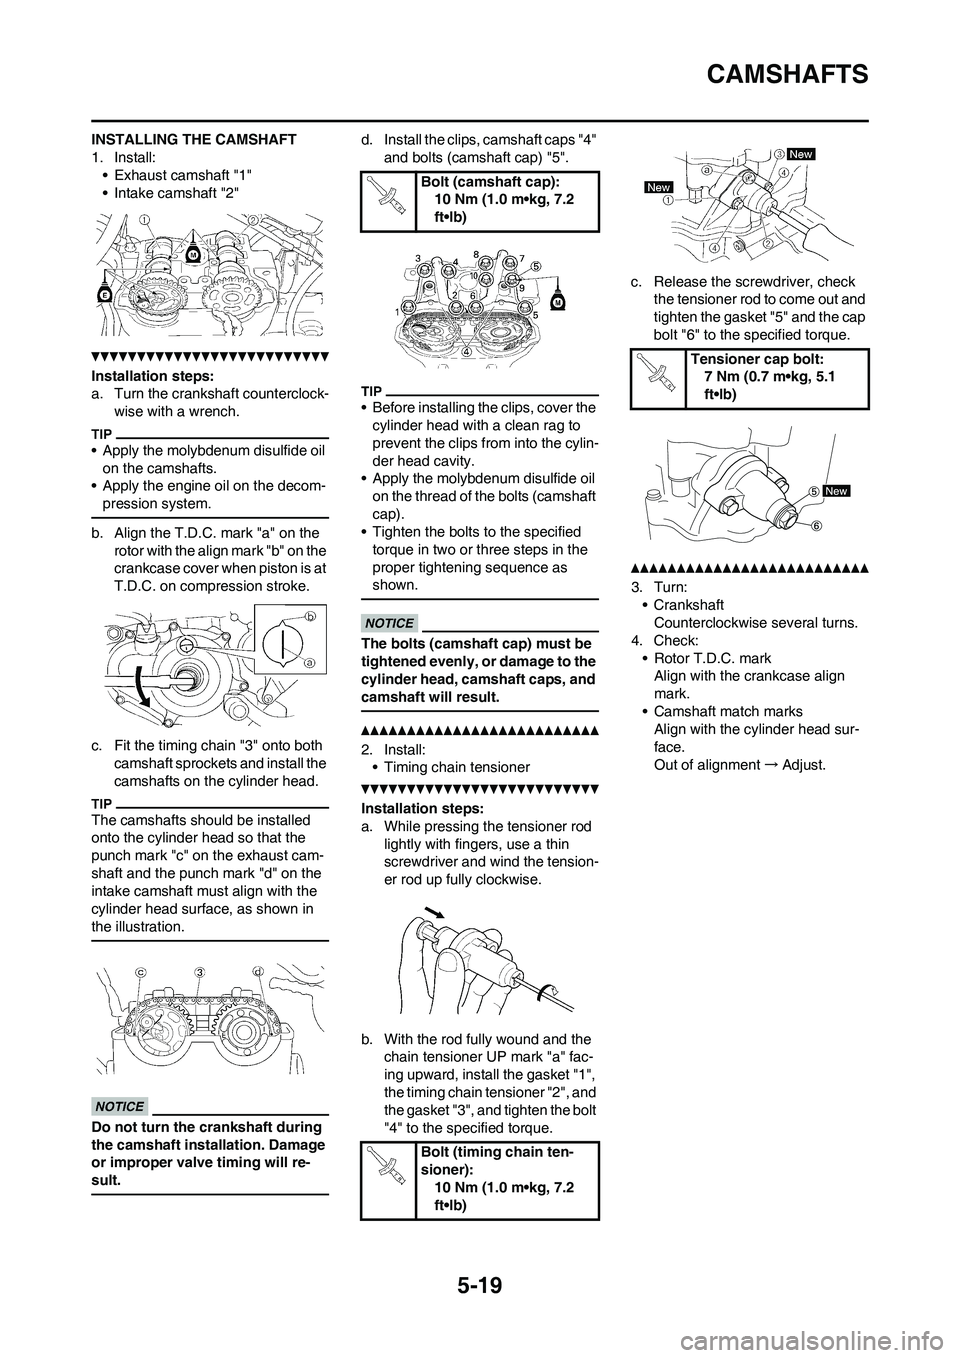 YAMAHA WR 450F 2010 Owners Manual 5-19
CAMSHAFTS
INSTALLING THE CAMSHAFT
1. Install:
• Exhaust camshaft "1"
• Intake camshaft "2"
Installation steps:
a. Turn the crankshaft counterclock-
wise with a wrench.
• Apply the molybdenu